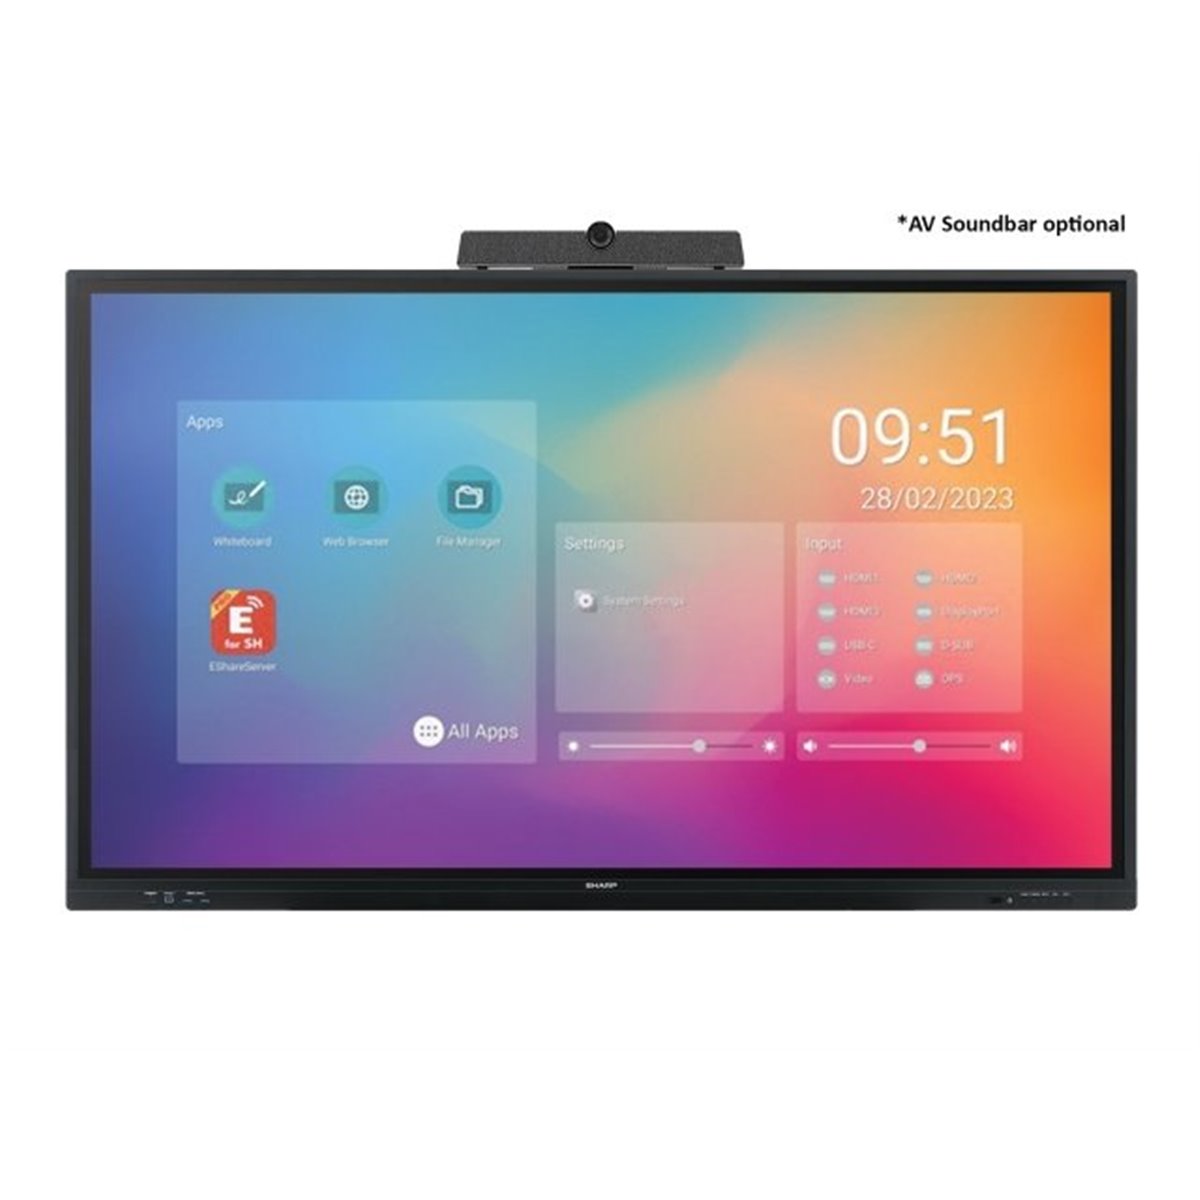 PN-LC862 - 86, interactive display, UHD, 350 cd-m2, Infrared, 20 touch points, OPS Slot, Android SoC, USB-C, HDMI-out.